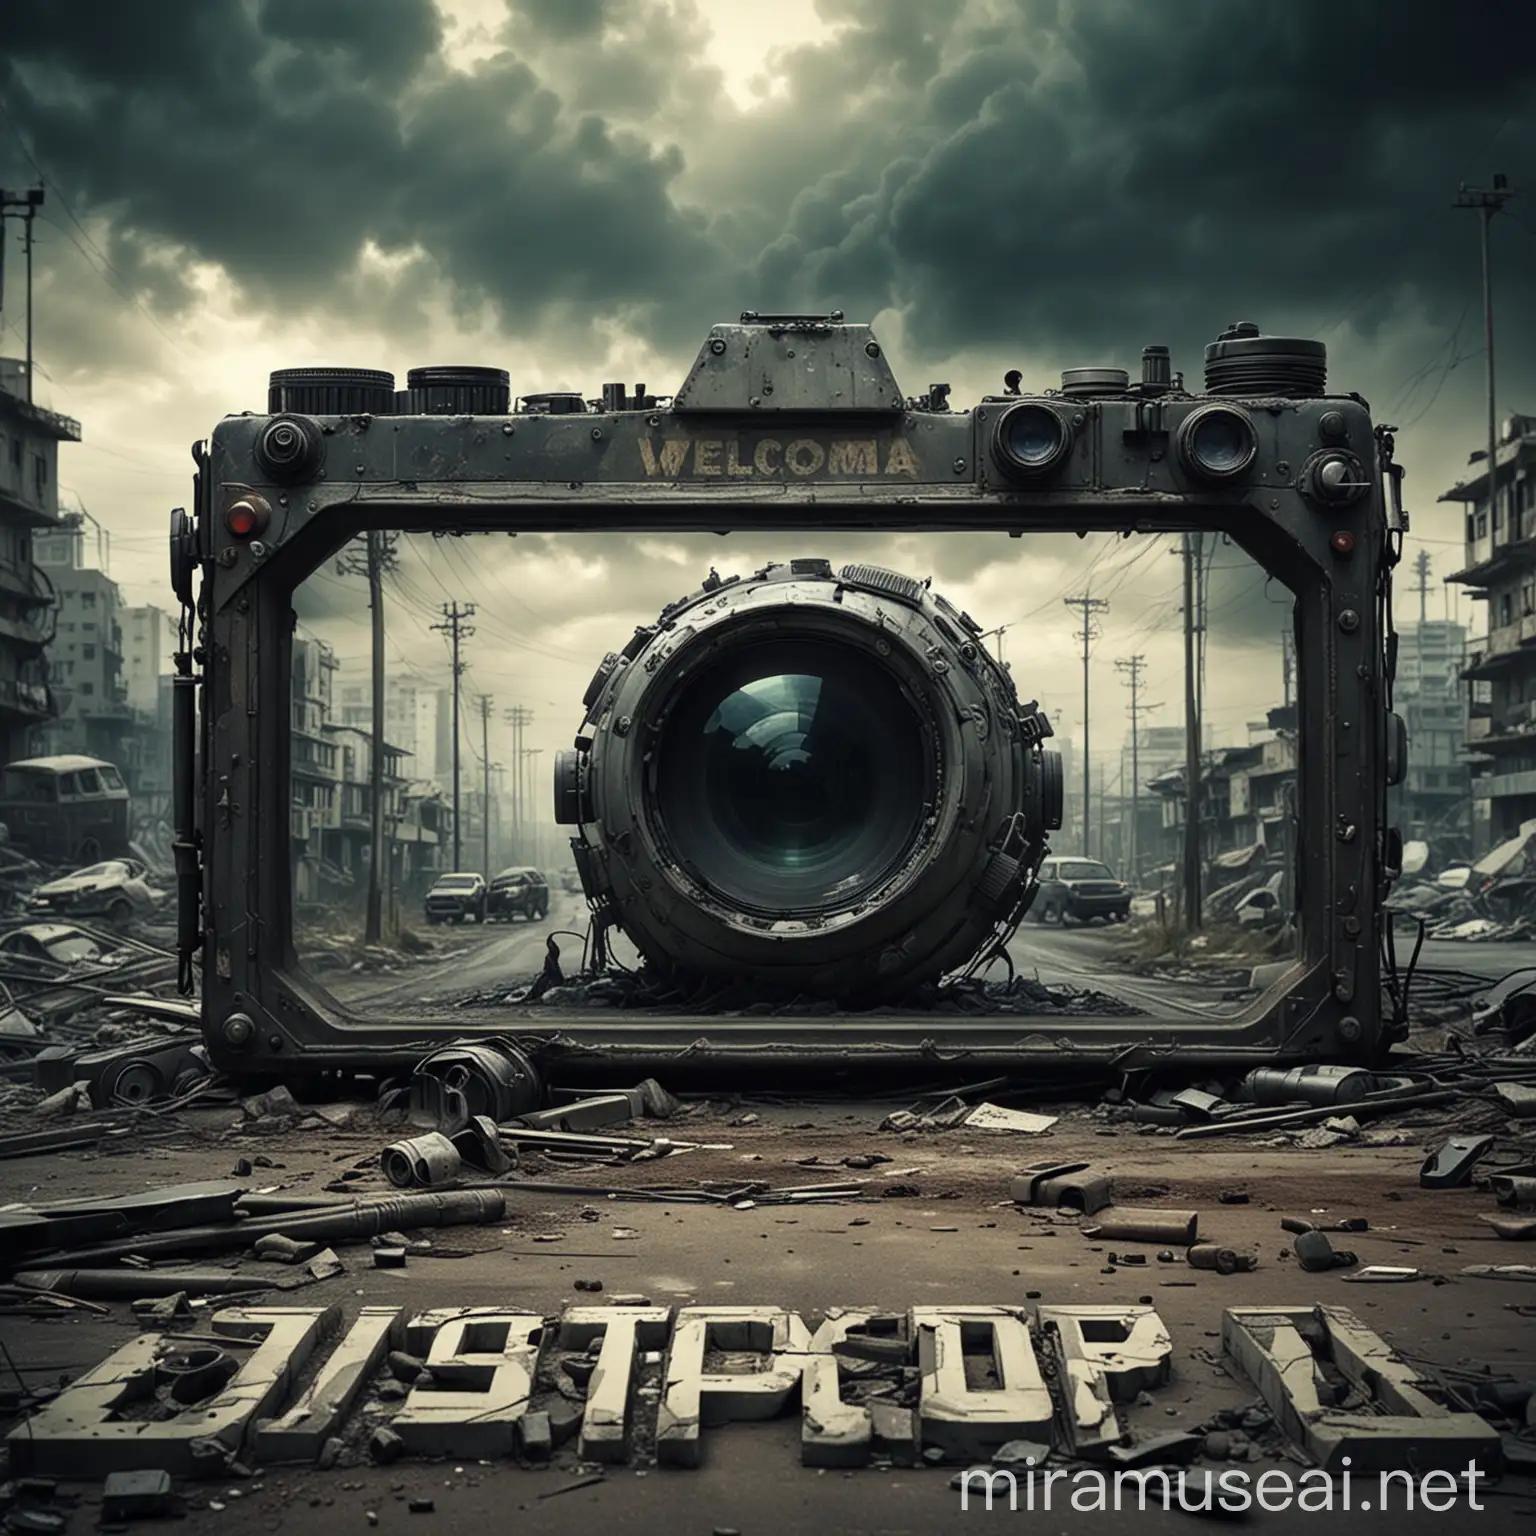 Welcome to Dystopia A Grim Future Revealed Through a Camera Lens